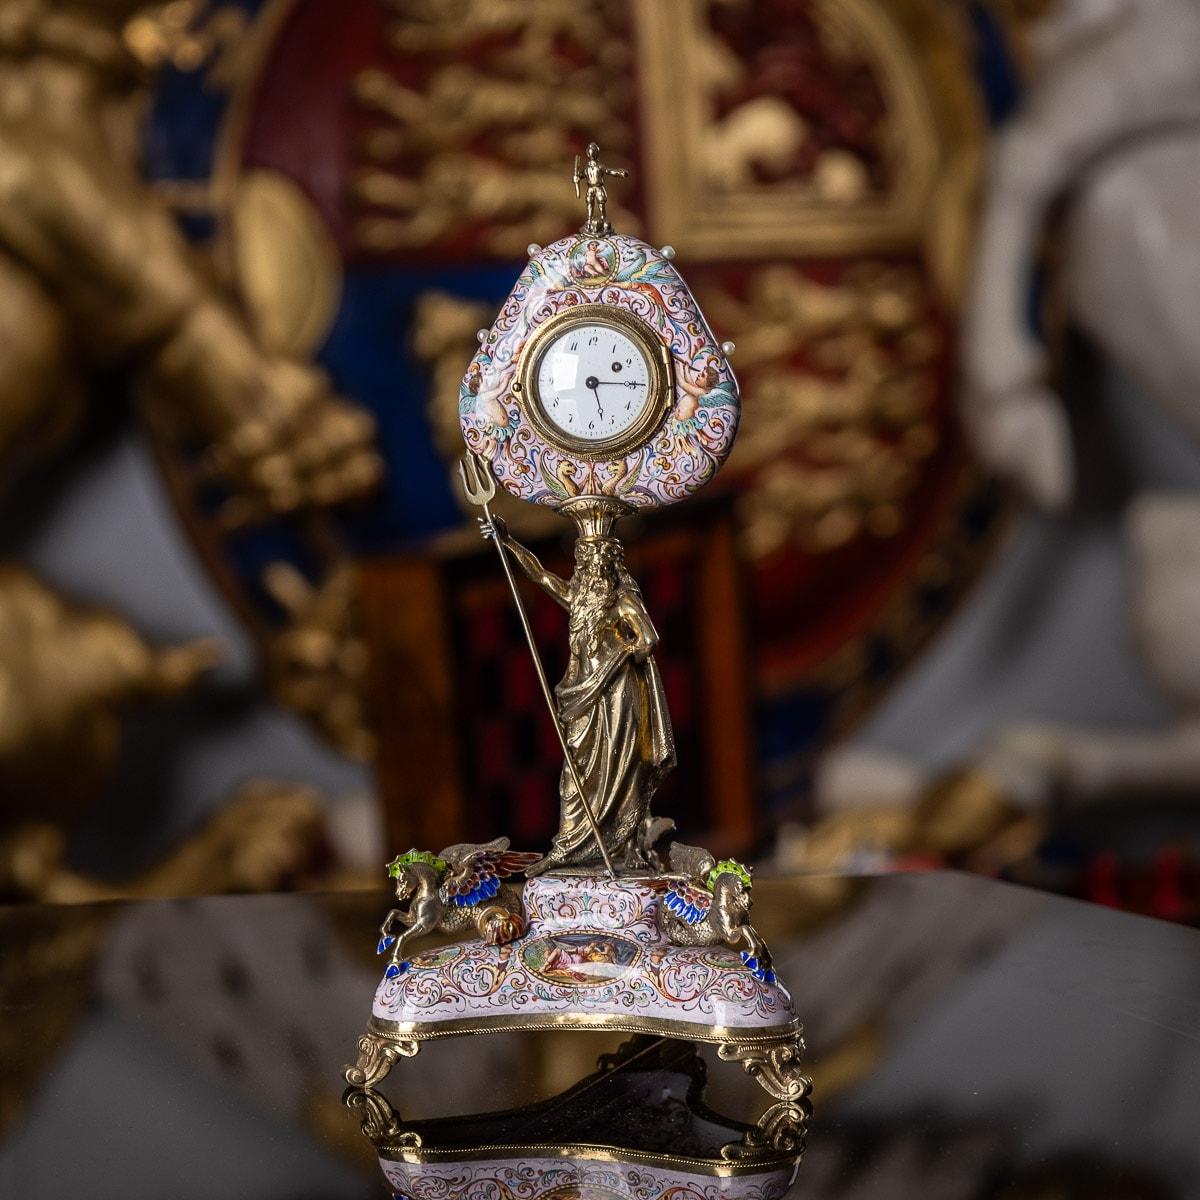 19th century Austrian silver gilt & hand painted enamel clock, heart shaped, mounted with fresh water pearls and a figural finial, elevated by a figure of Poseidon on a triangular base. The corners set with three Hippocampus (mythical sea horses),